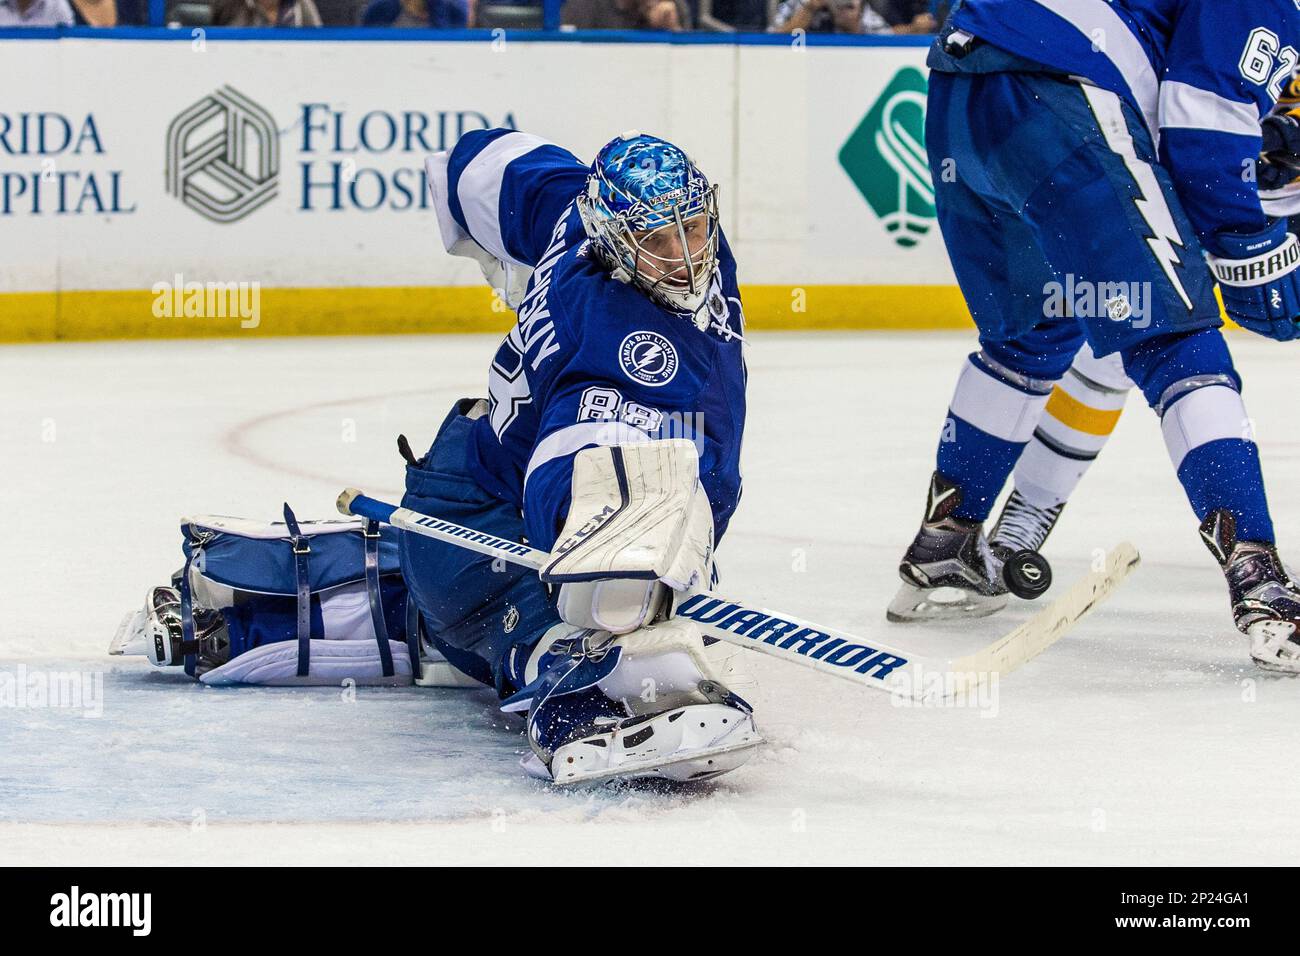 Novemebr 10, 2015: Tampa Bay Lightning goalie Andrei Vasilevskiy #88  watches for the puck in the 2nd period in the game between the Tampa Bay  Lightning & the Buffalo Sabres at Amalie